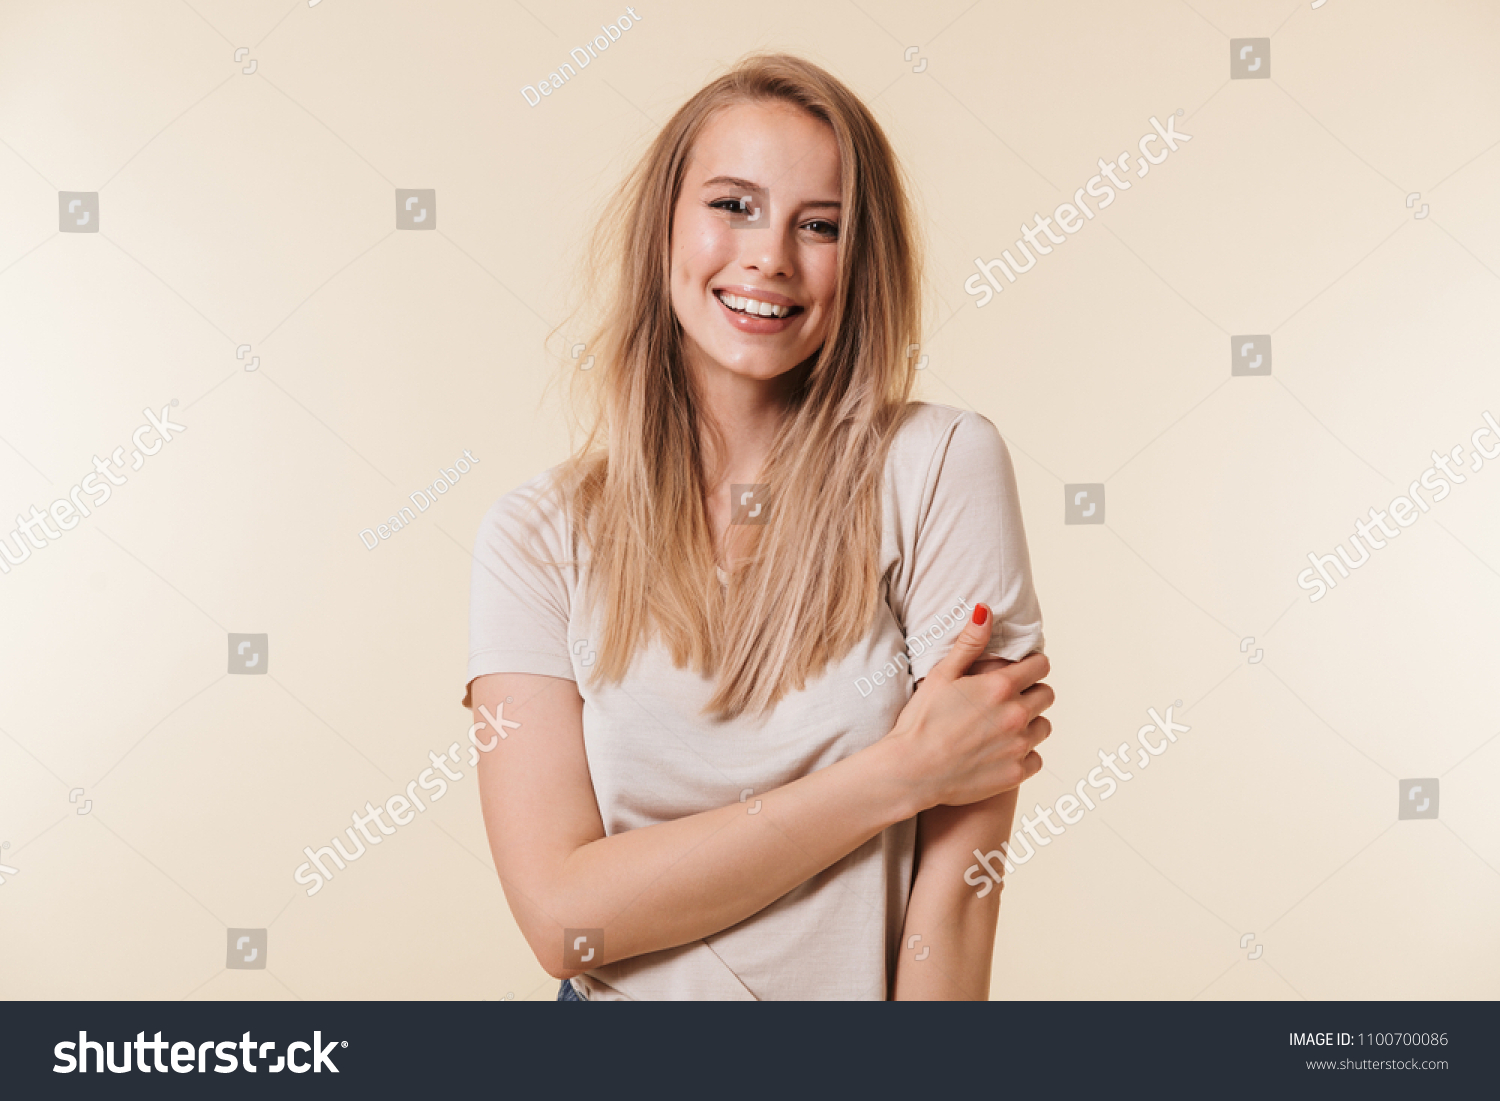 Portrait of beautiful woman 20s with blond hair in basic t-shirt smiling and looking at camera isolated over beige background in studio #1100700086